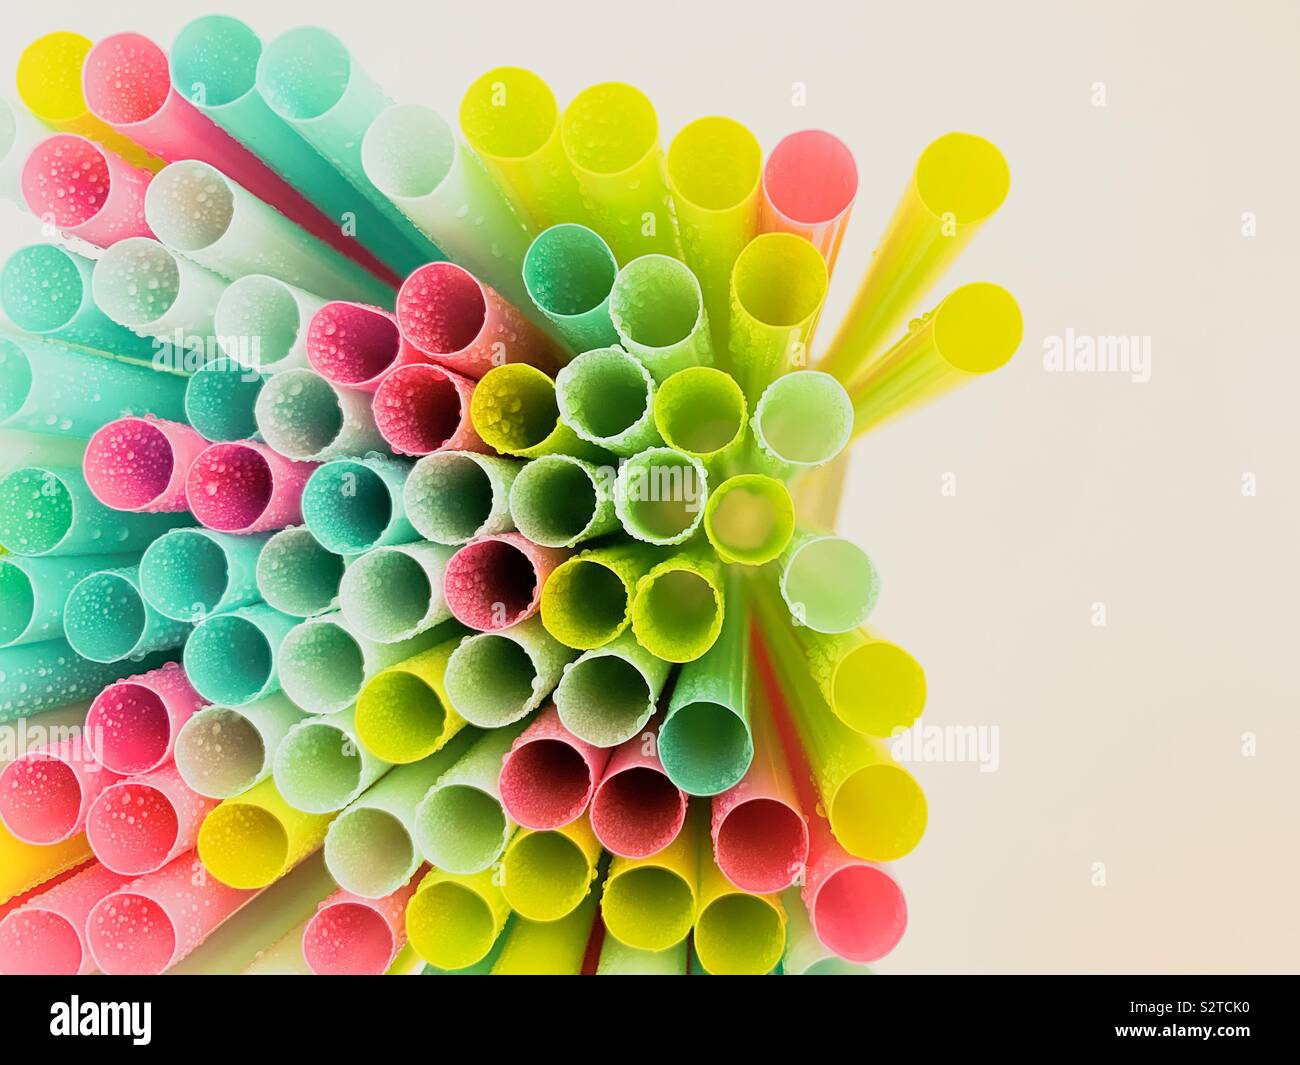 Plastic drinking straws with white background Stock Photo